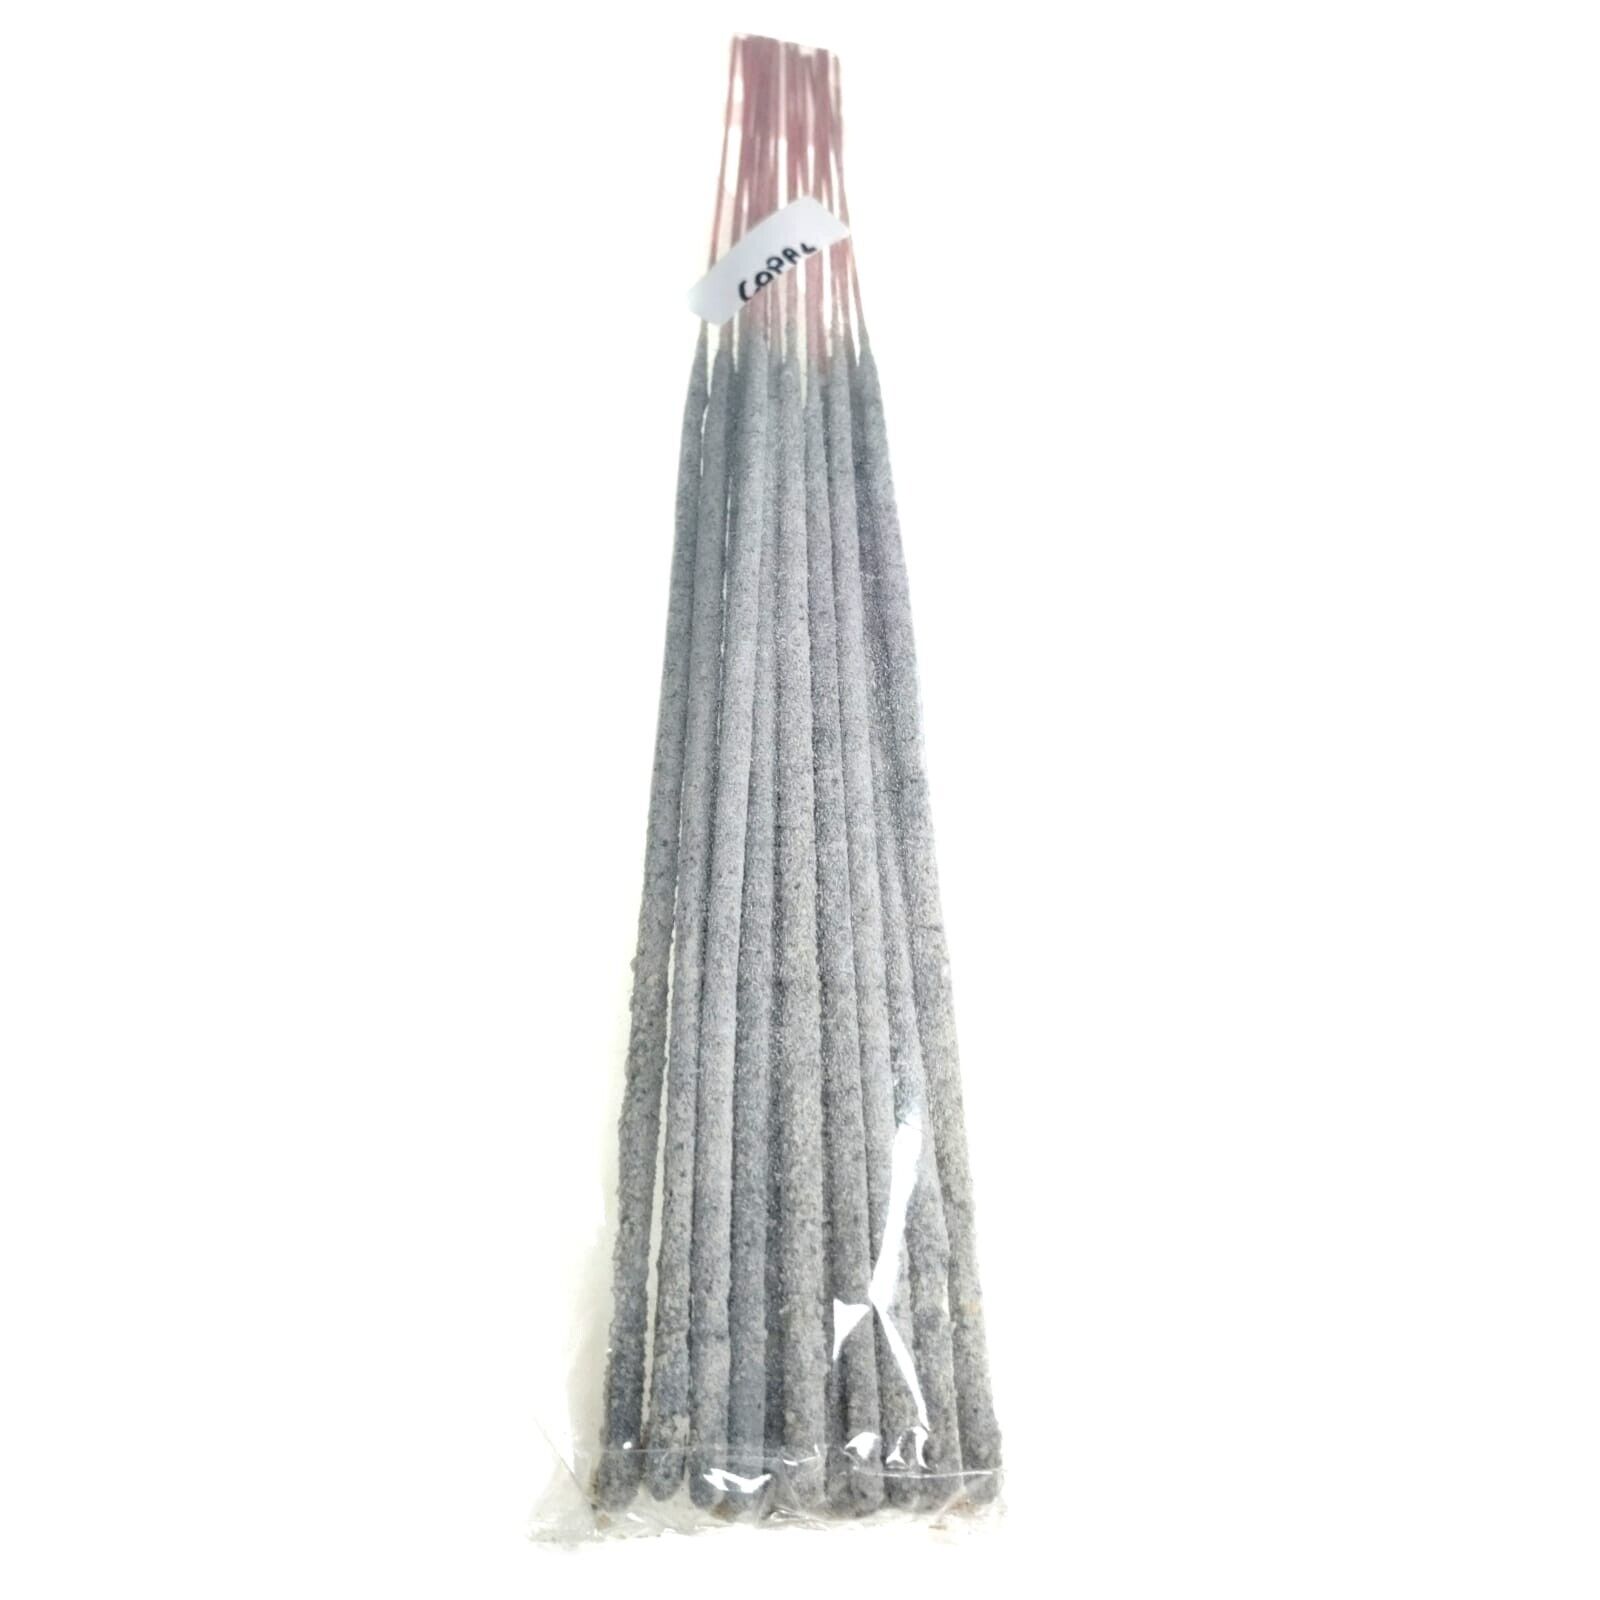 200 Sticks Incense Copal Resin Deluxe Mayan Aztec Ritual - Best Quality